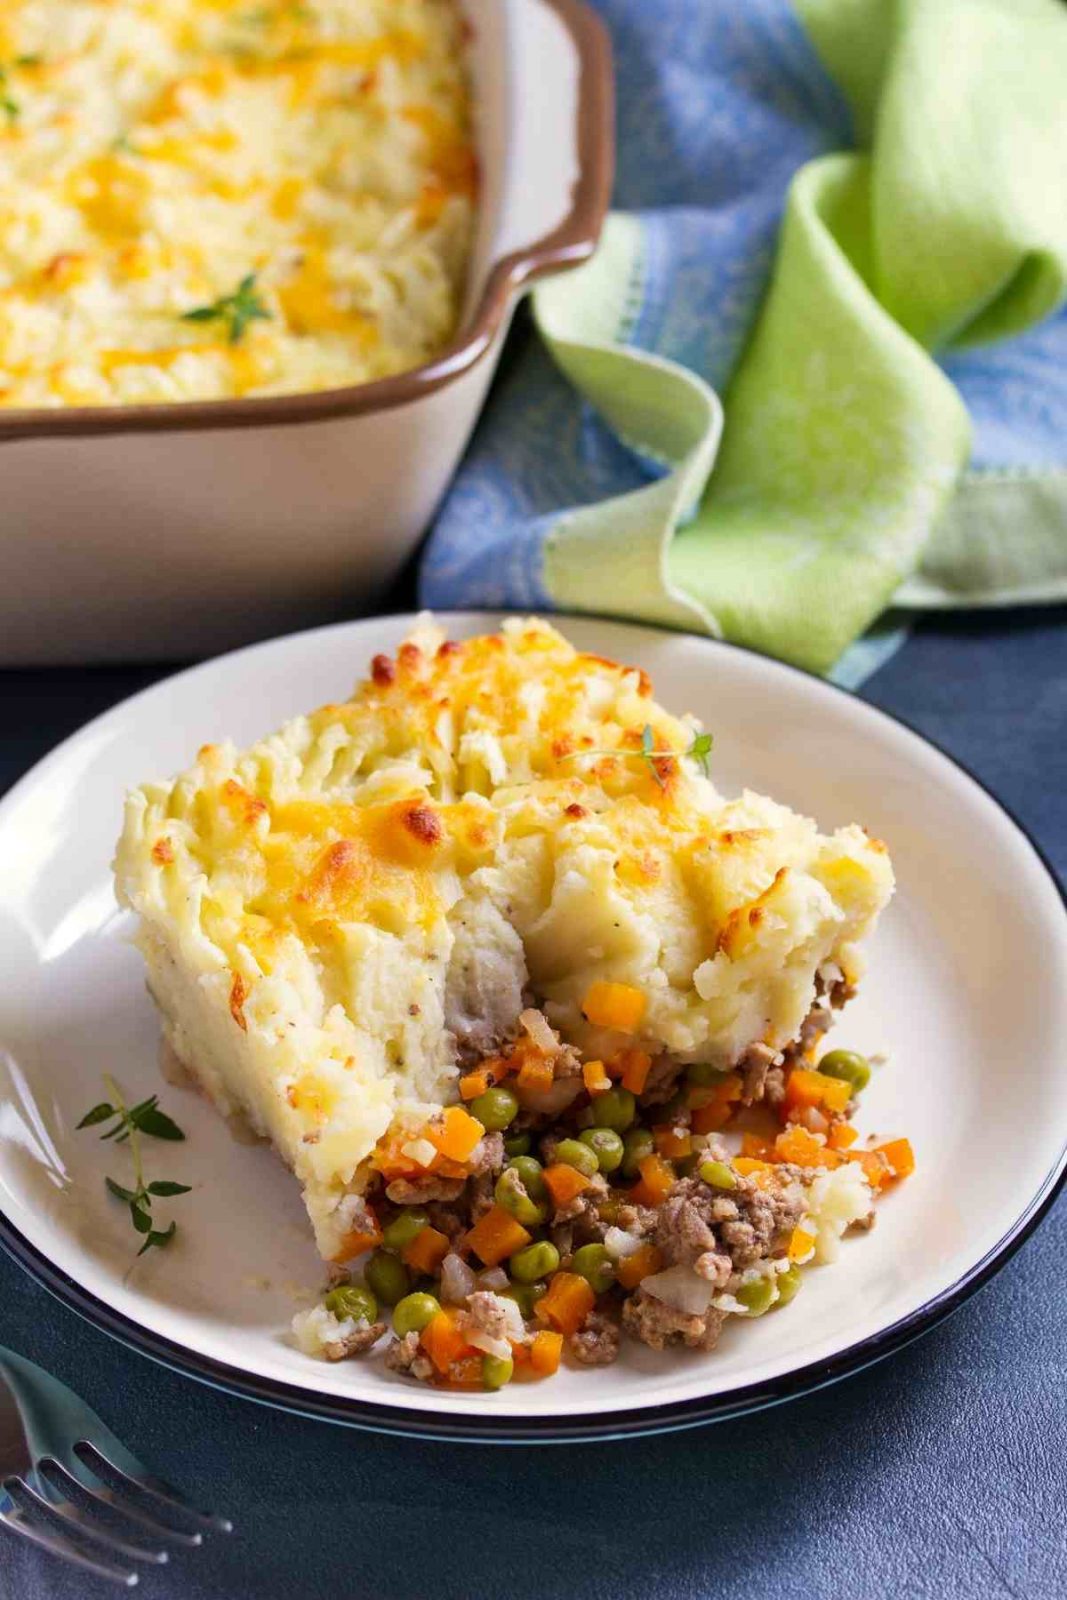 Are you looking for the best shepherd’s pie recipe? Then you’ve come to the right place! Here you’ll get a shepherd's pie recipe that is loaded with beef, vegetables, herbs and potatoes, and one irresistible sauce. Plus, you’ll learn how you long to bake it and some tips and tricks too, that’ll help you get the best results every single time!